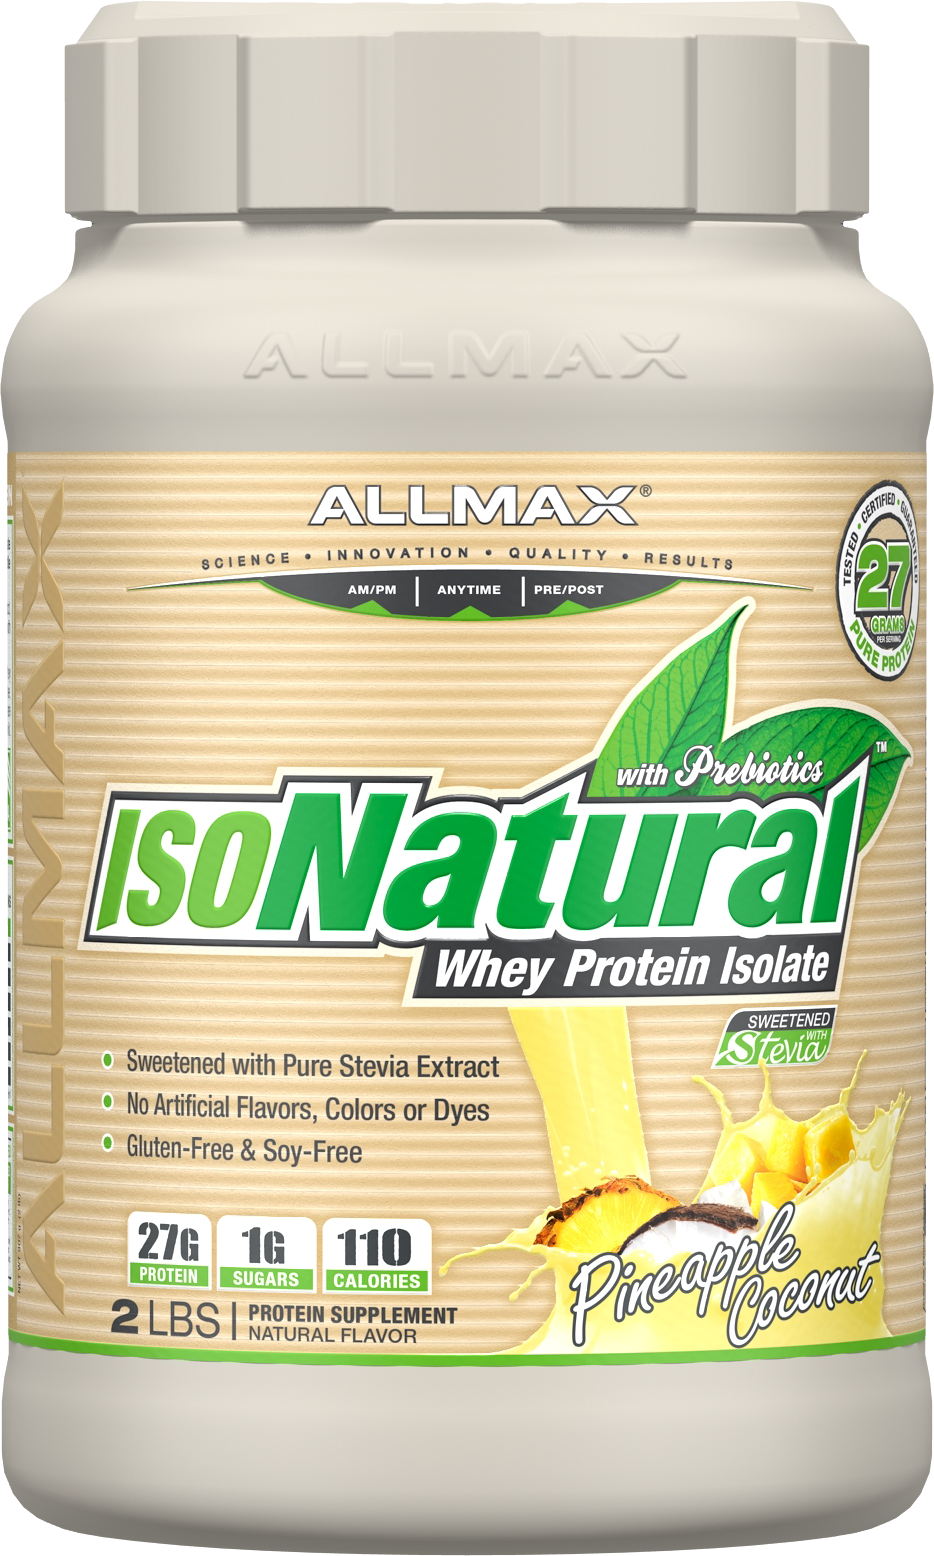 Allmax IsoNatural, 100% Natural Pure Whey Protein Isolate, 99% Lactose Free